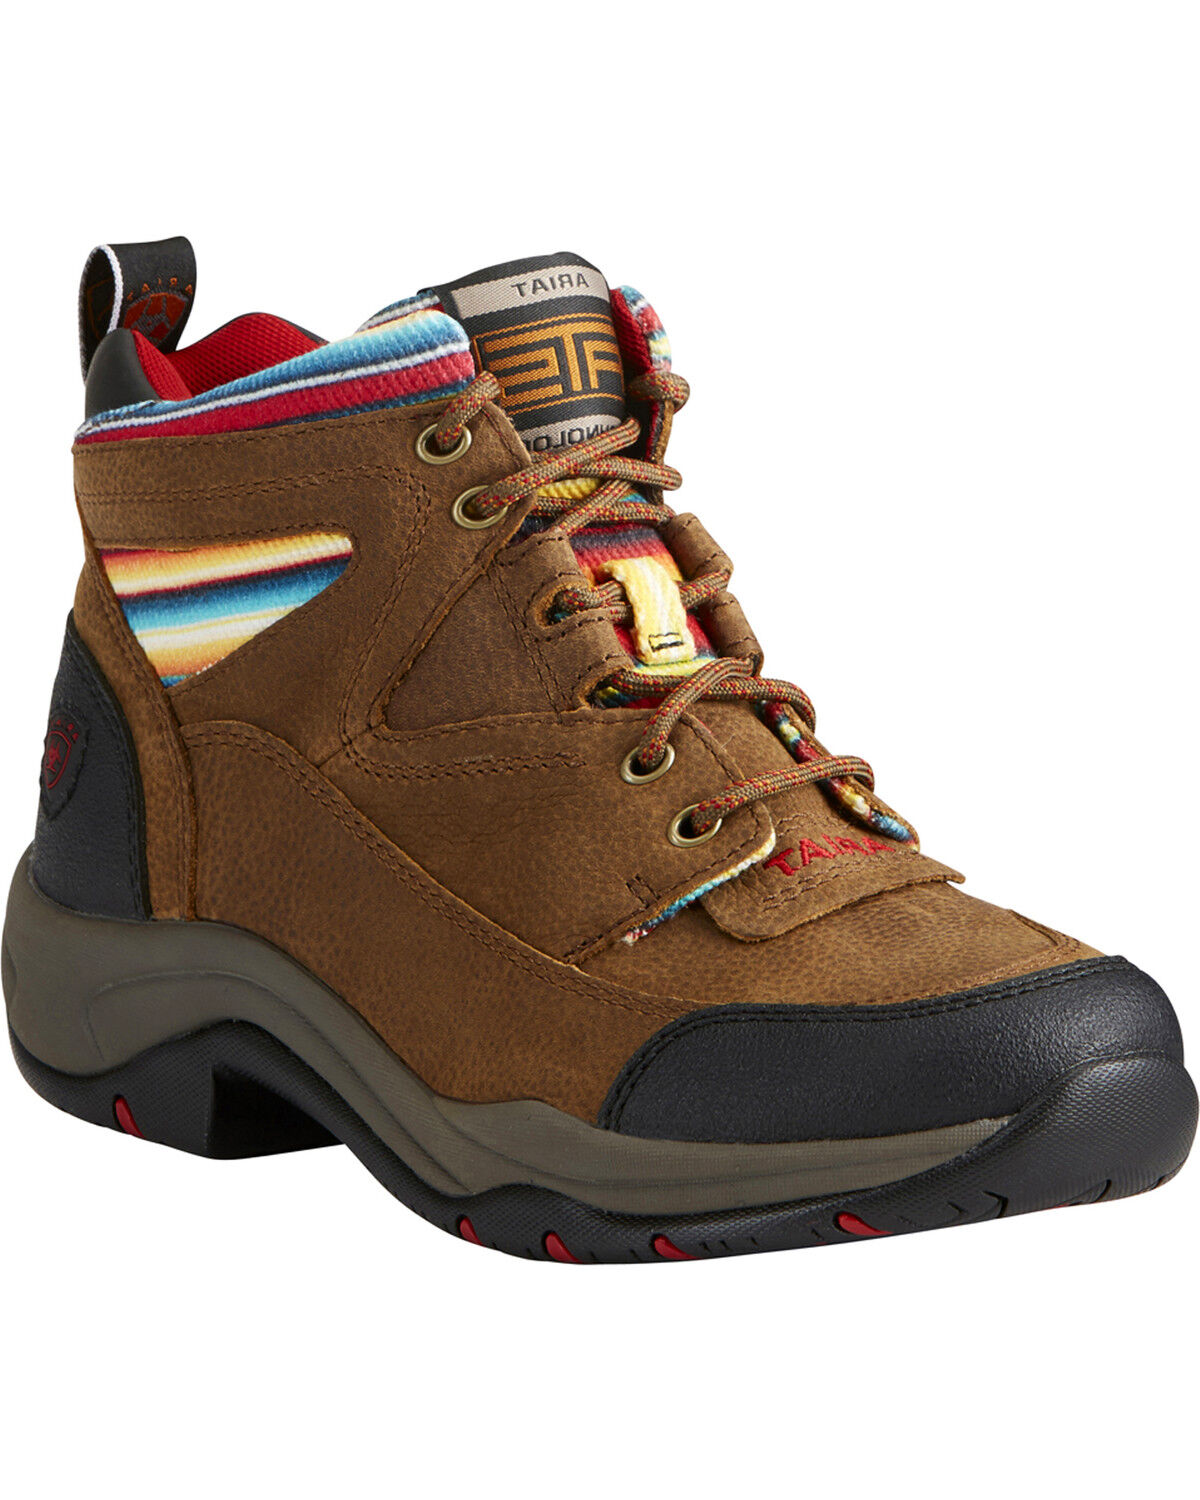 lace up hiking boots women's